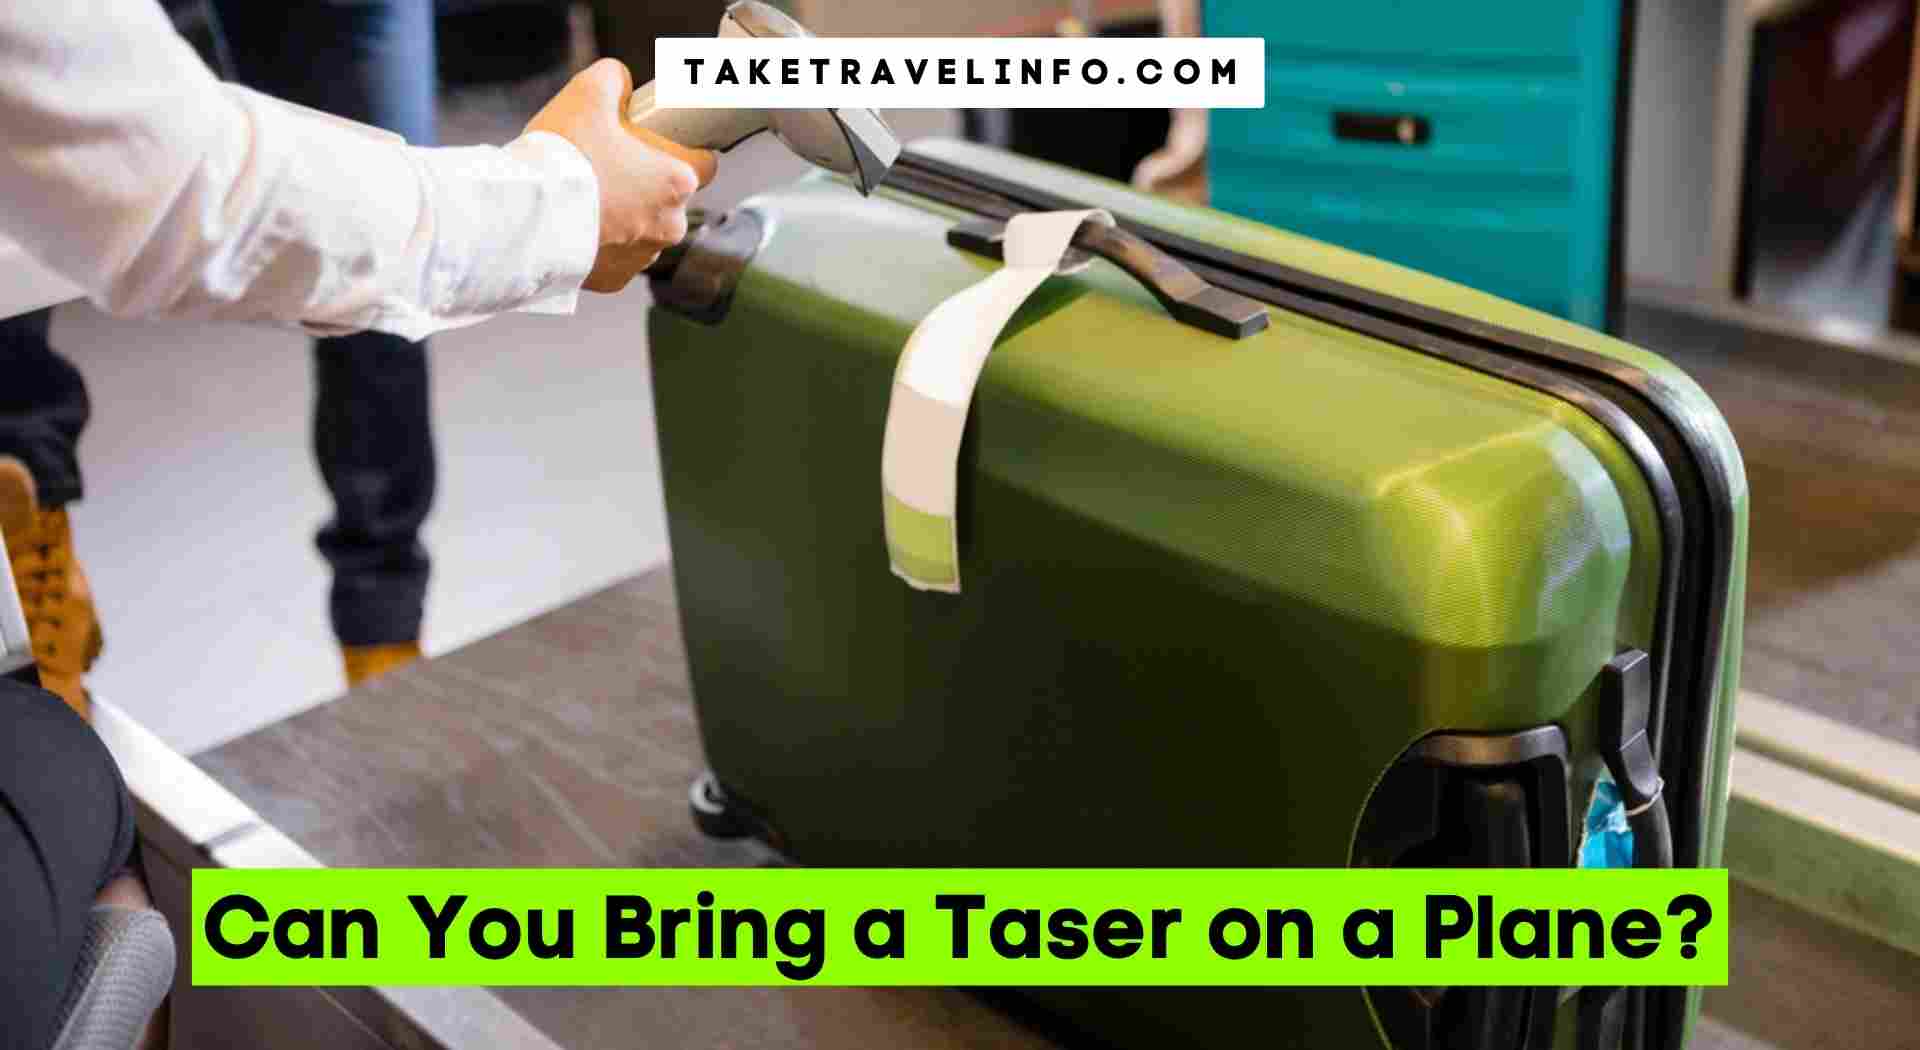 Can You Bring a Taser on a Plane?